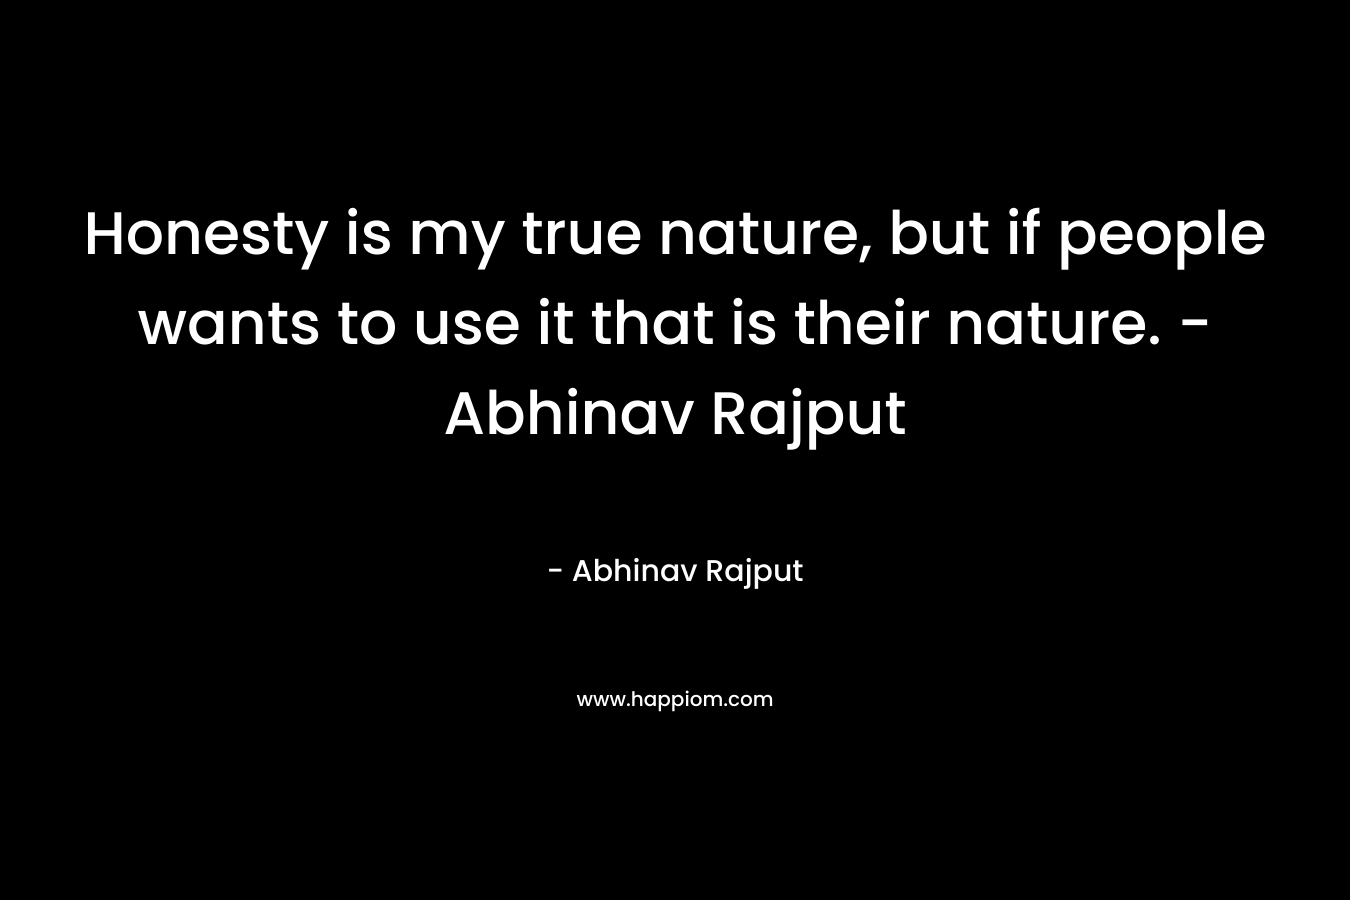 Honesty is my true nature, but if people wants to use it that is their nature. - Abhinav Rajput